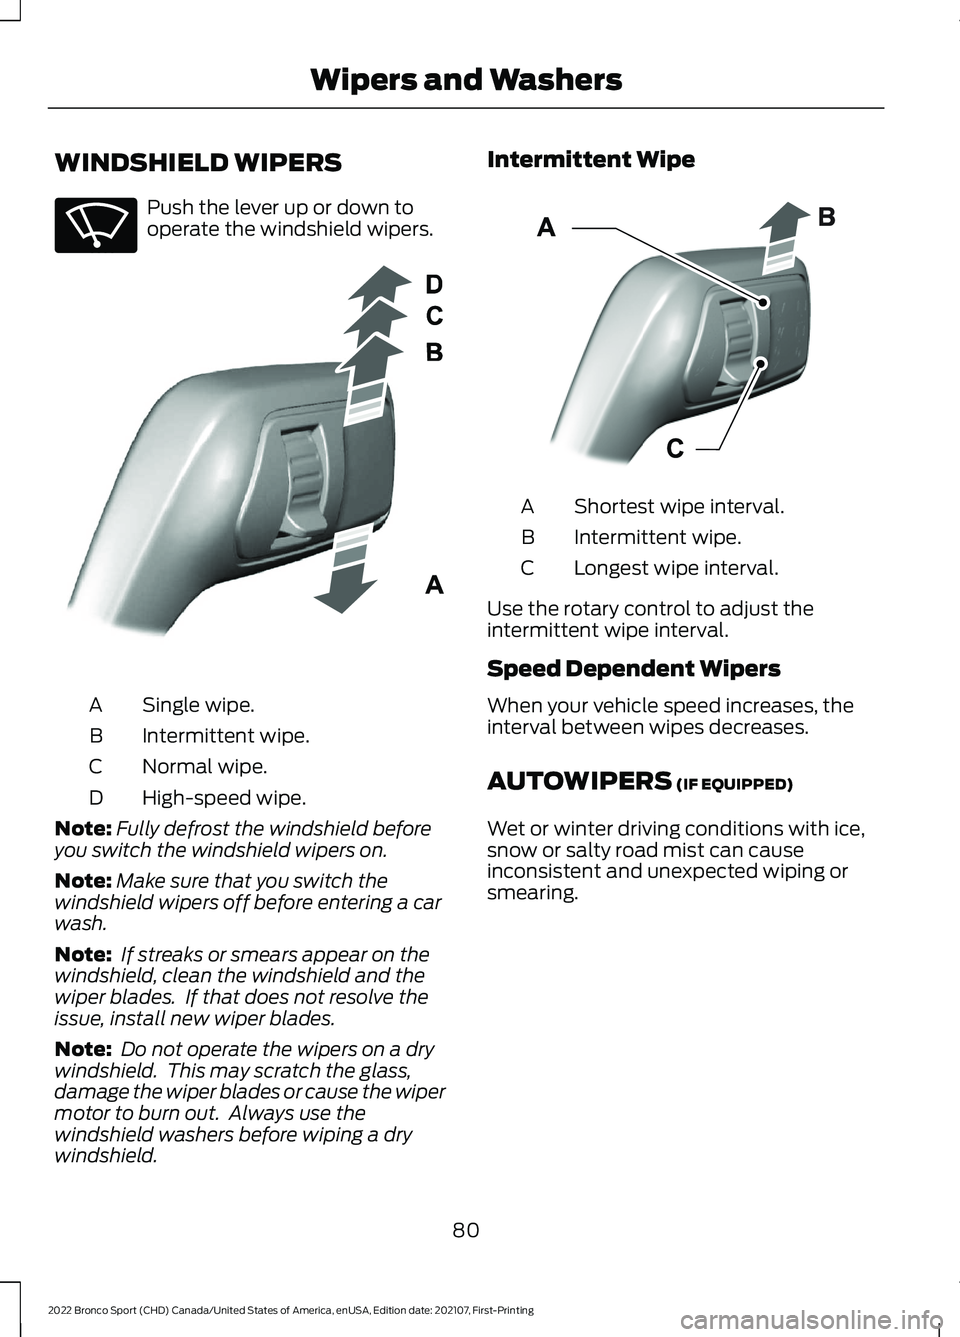 FORD BRONCO SPORT 2022  Owners Manual WINDSHIELD WIPERS
Push the lever up or down to
operate the windshield wipers.
Single wipe.
A
Intermittent wipe.
B
Normal wipe.
C
High-speed wipe.
D
Note: Fully defrost the windshield before
you switch